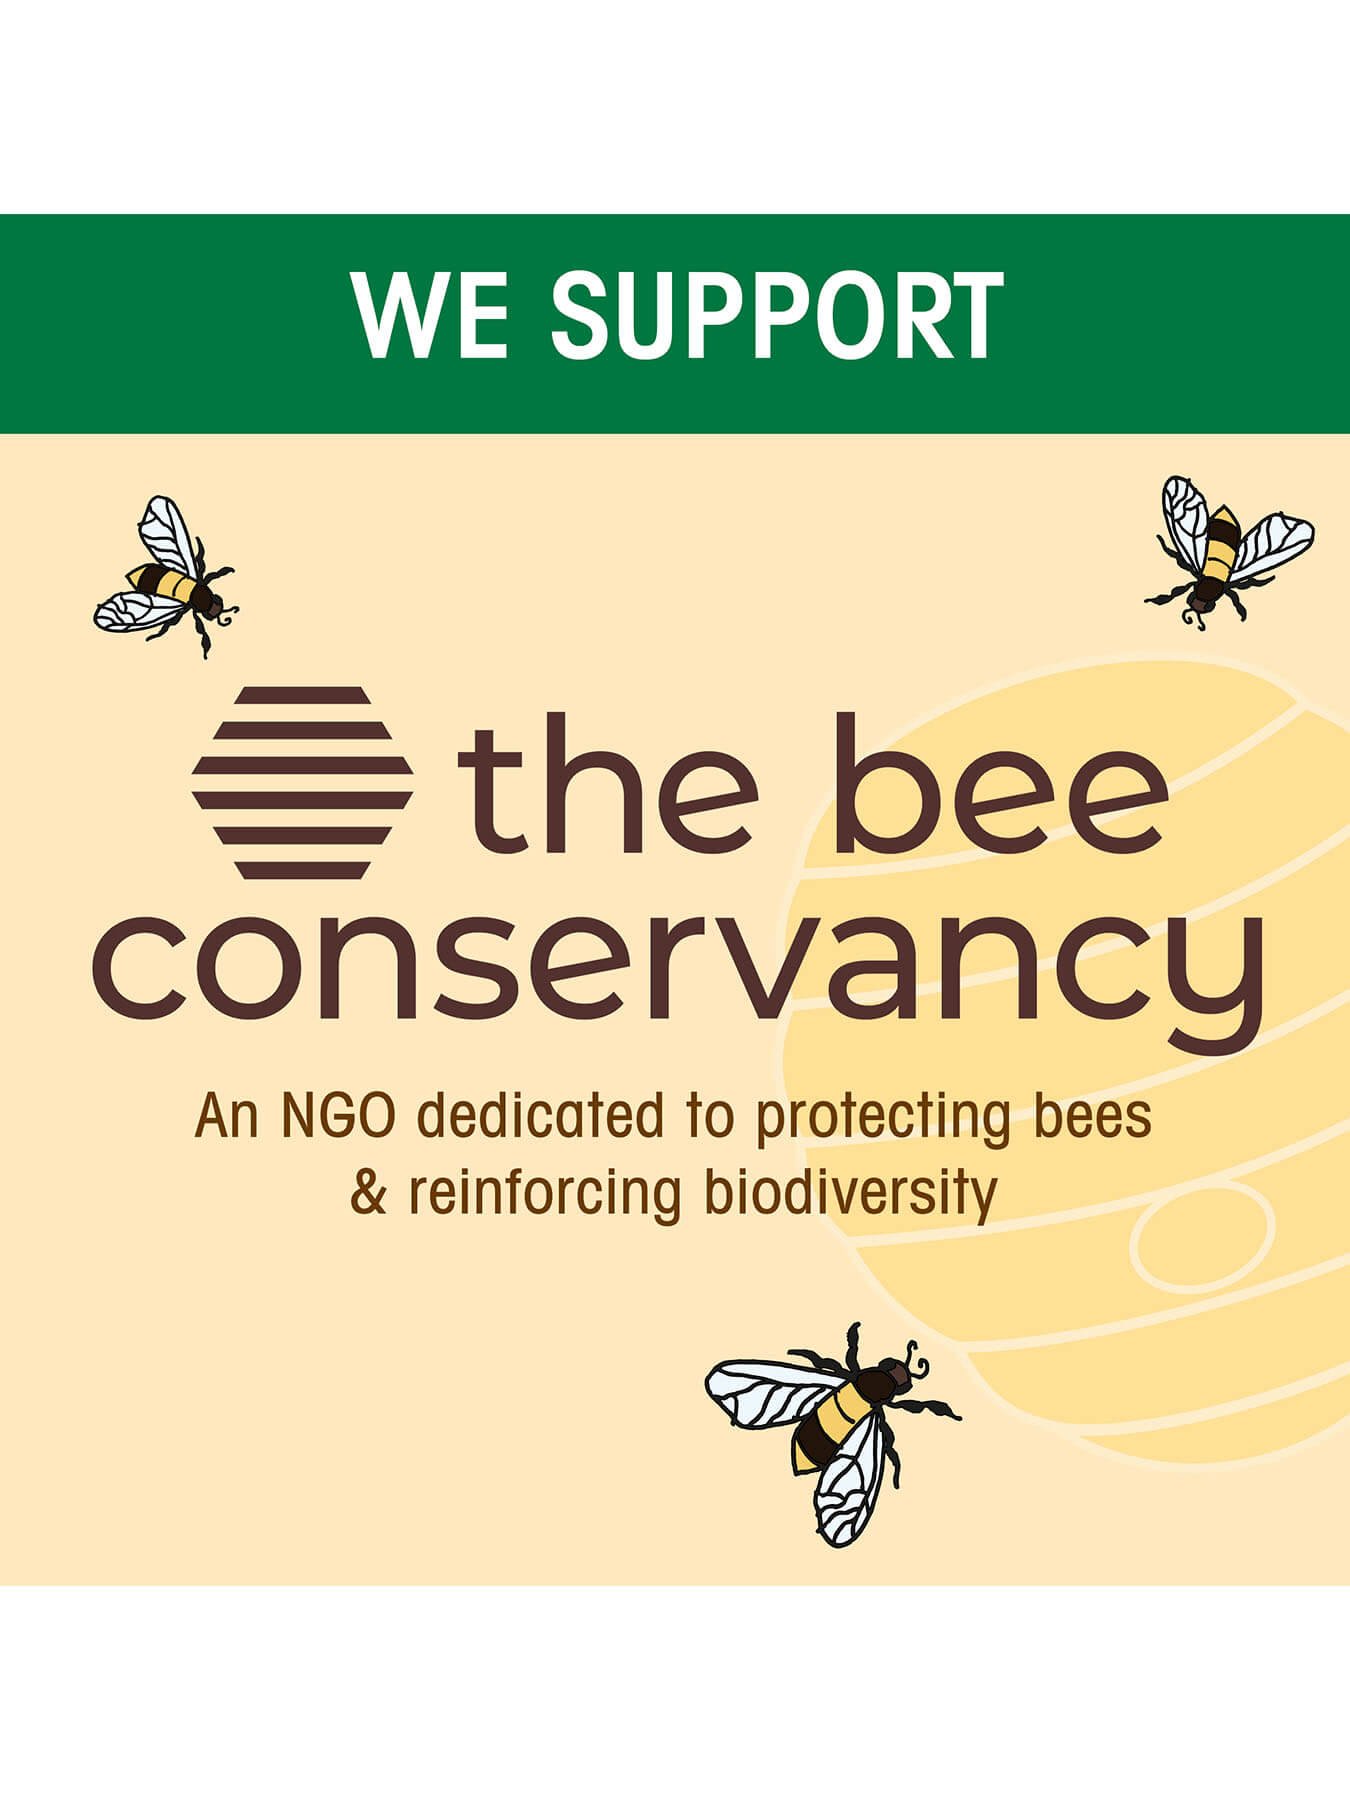 Ultimate Blends Honey Treasures we support the bee conservancy